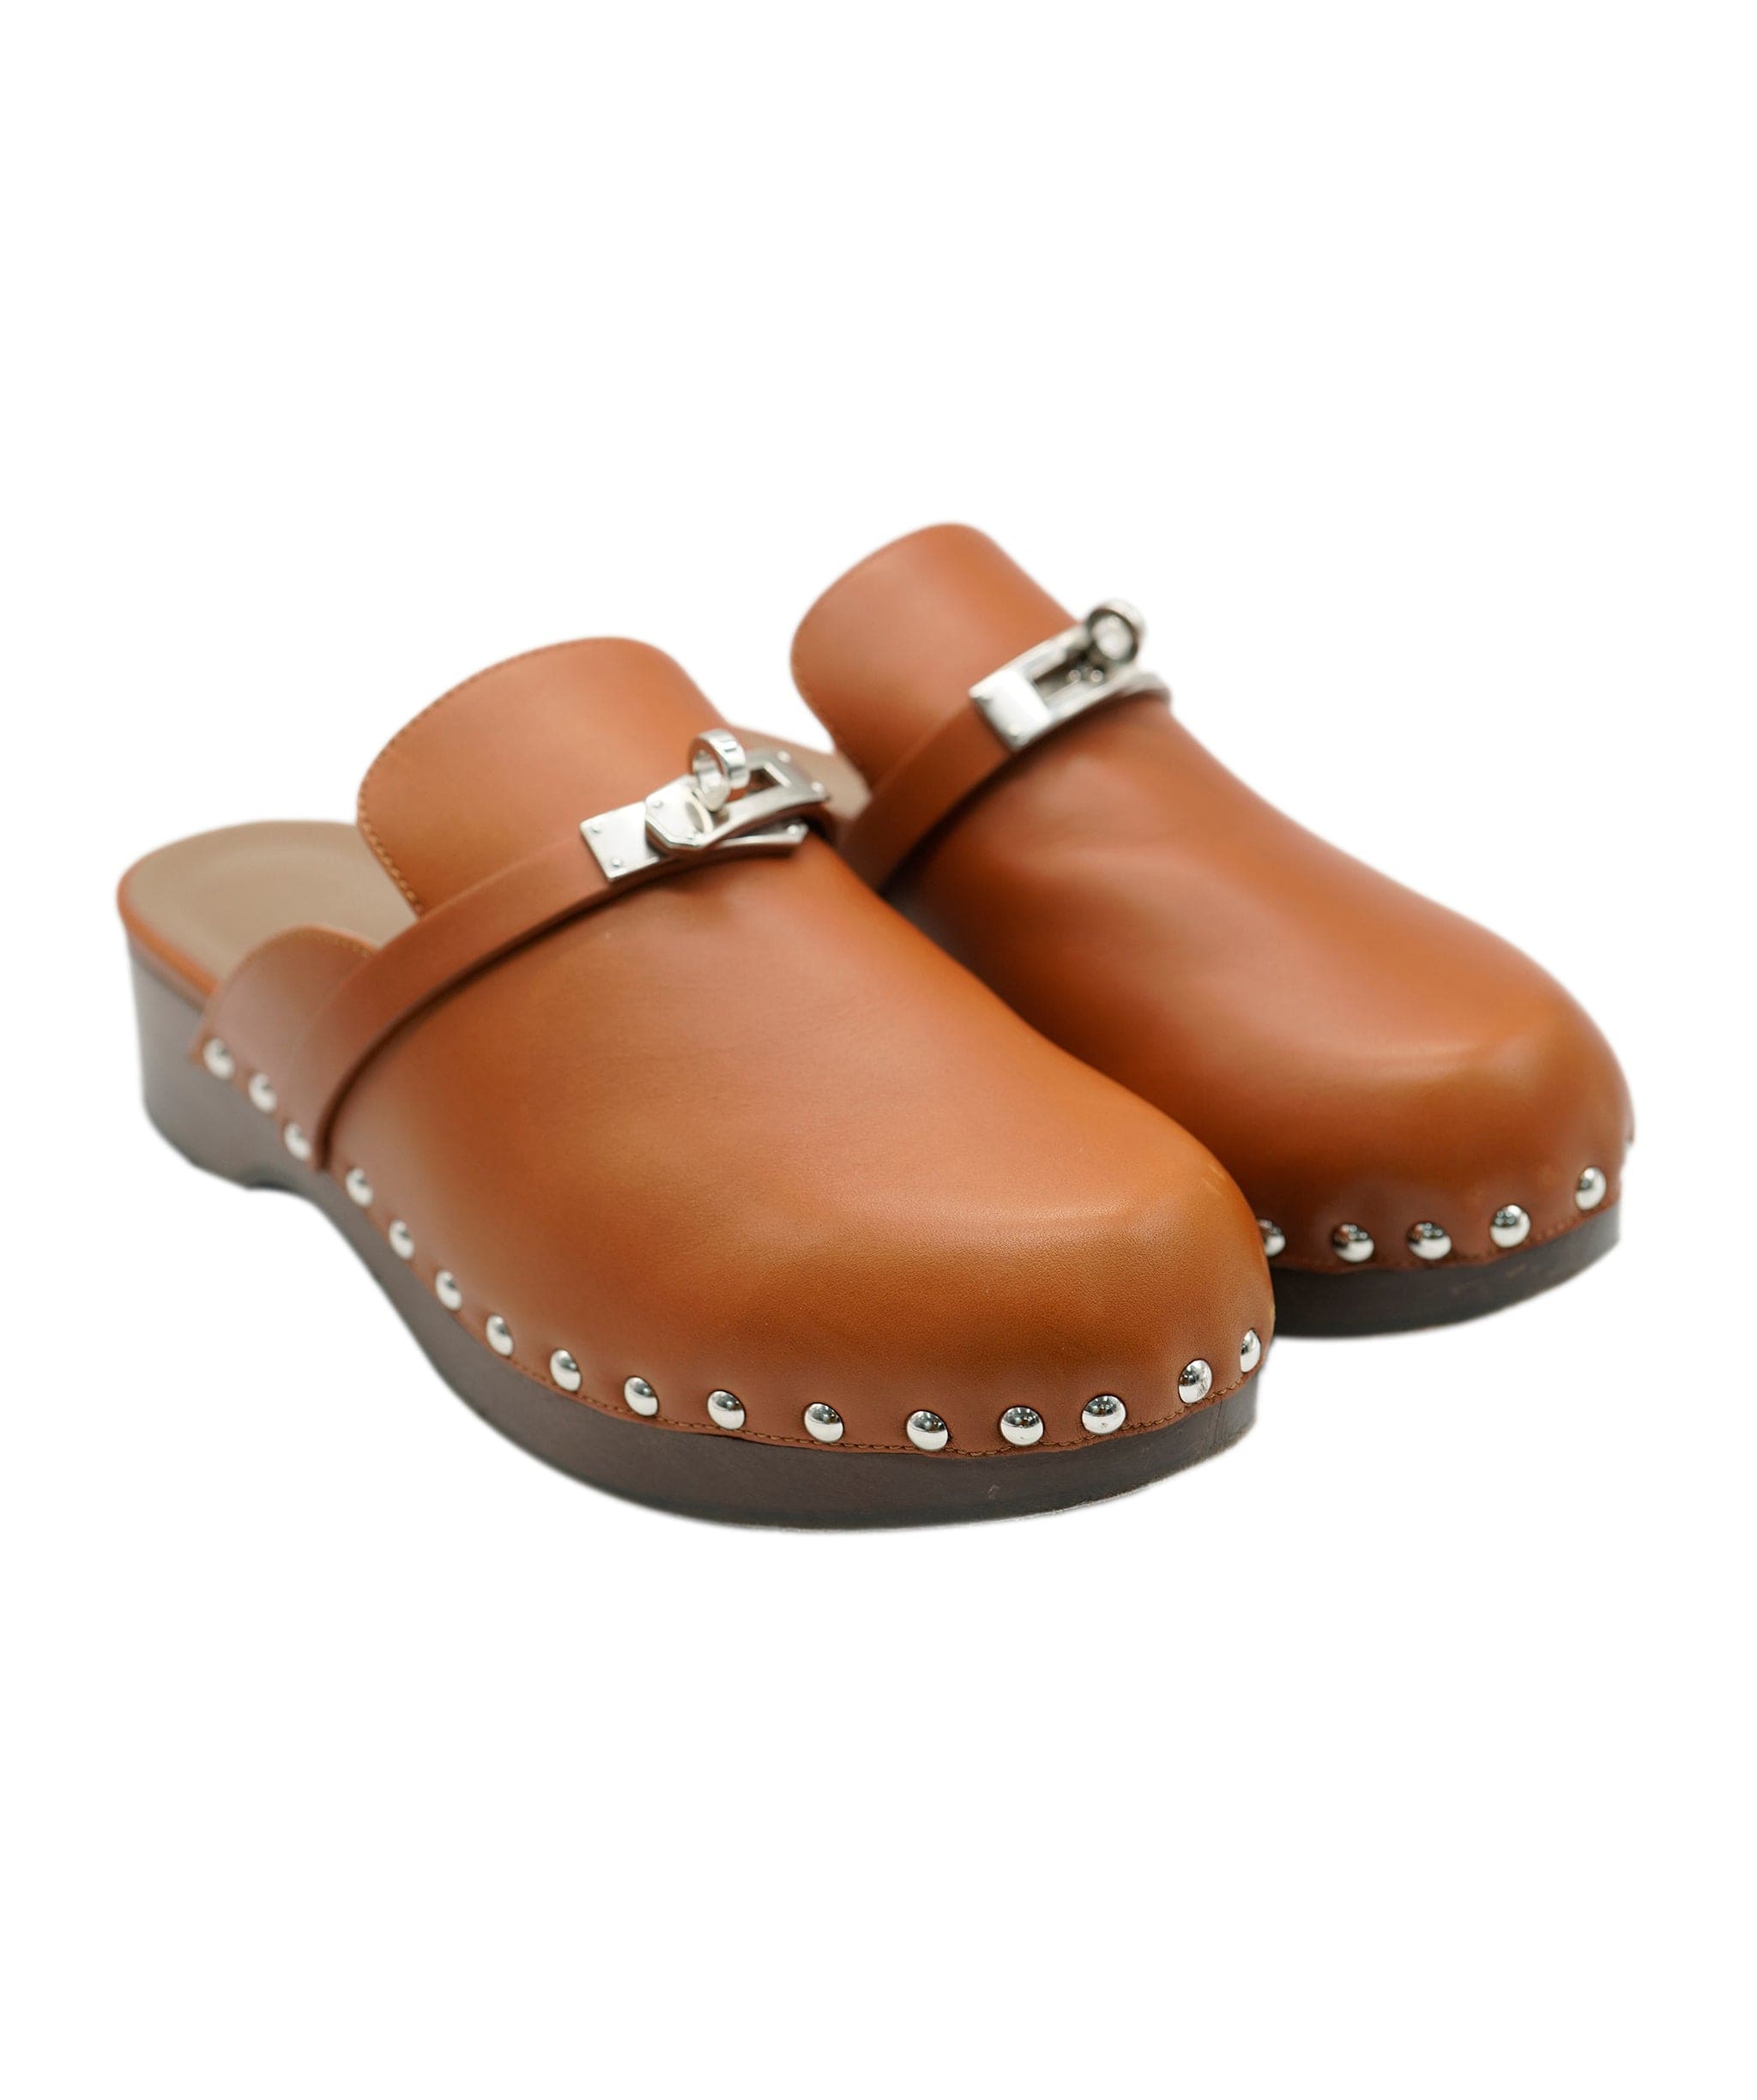 Hermès Hermes Natural Clogs with turnlocks size 39 AVL1150